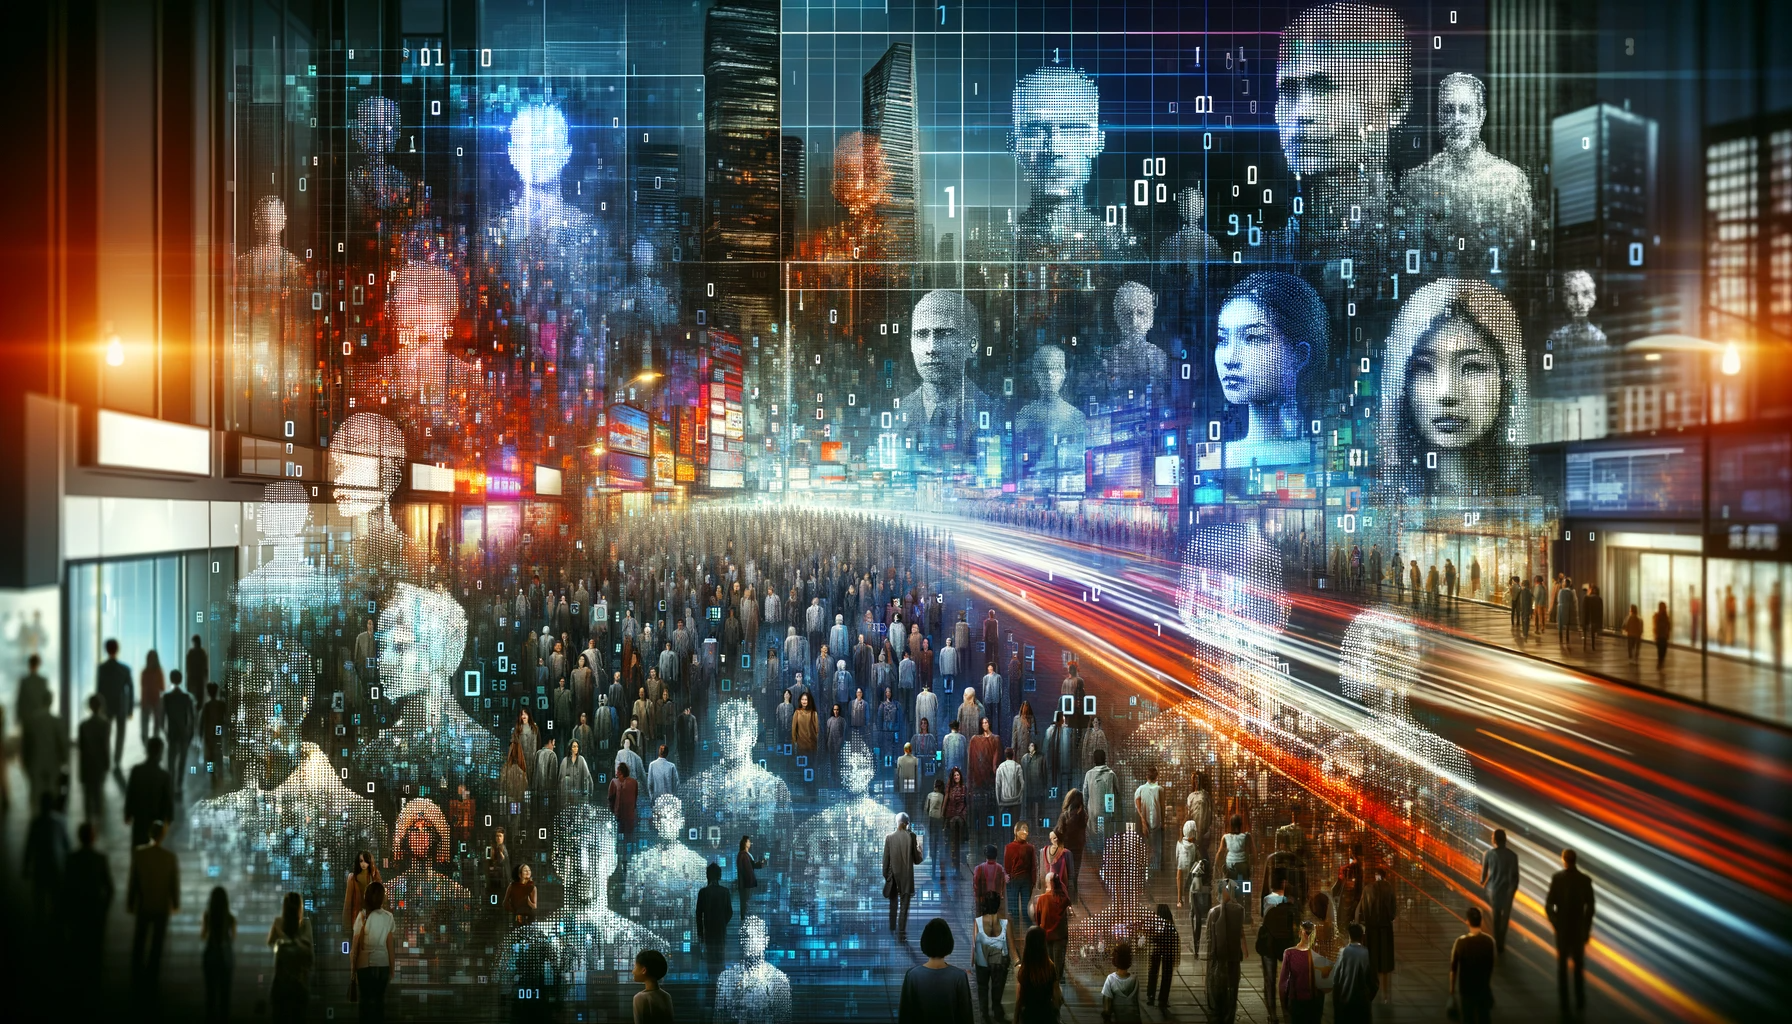 This conceptual artwork features a diverse range of people partially transformed into digital pixels, set against a modern, technology-driven cityscape.